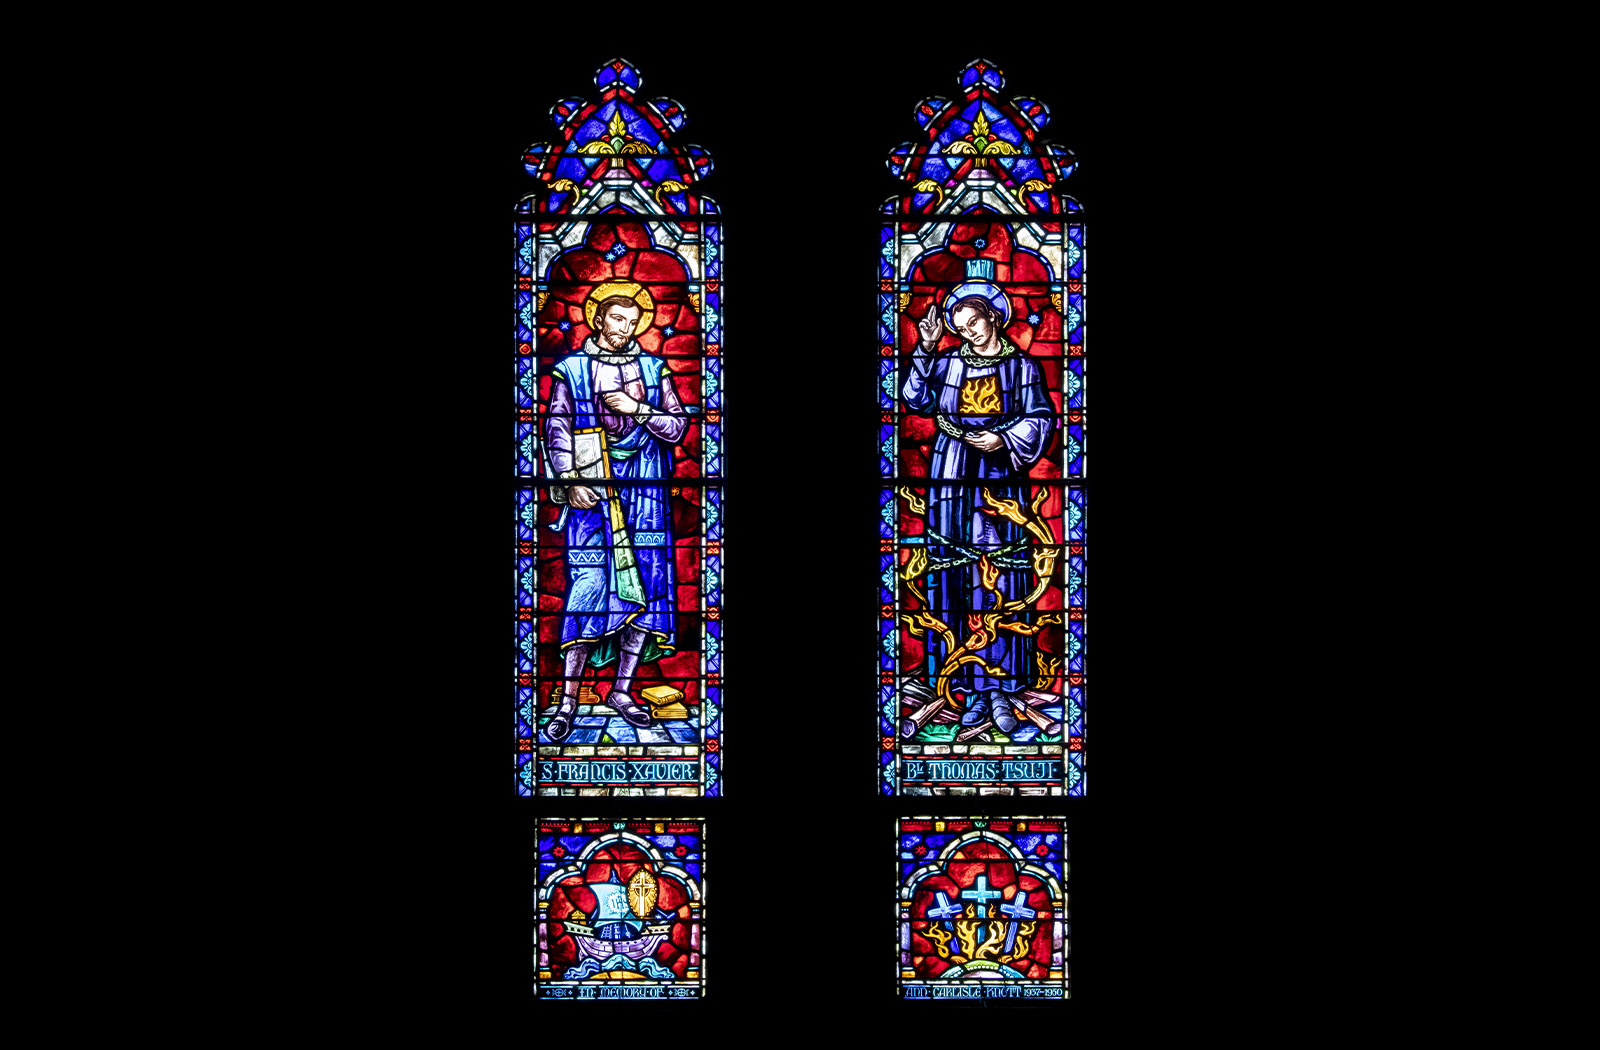 Two colorful stained glass panels of St. Francis Xavier and Blessed Thomas Tsuji